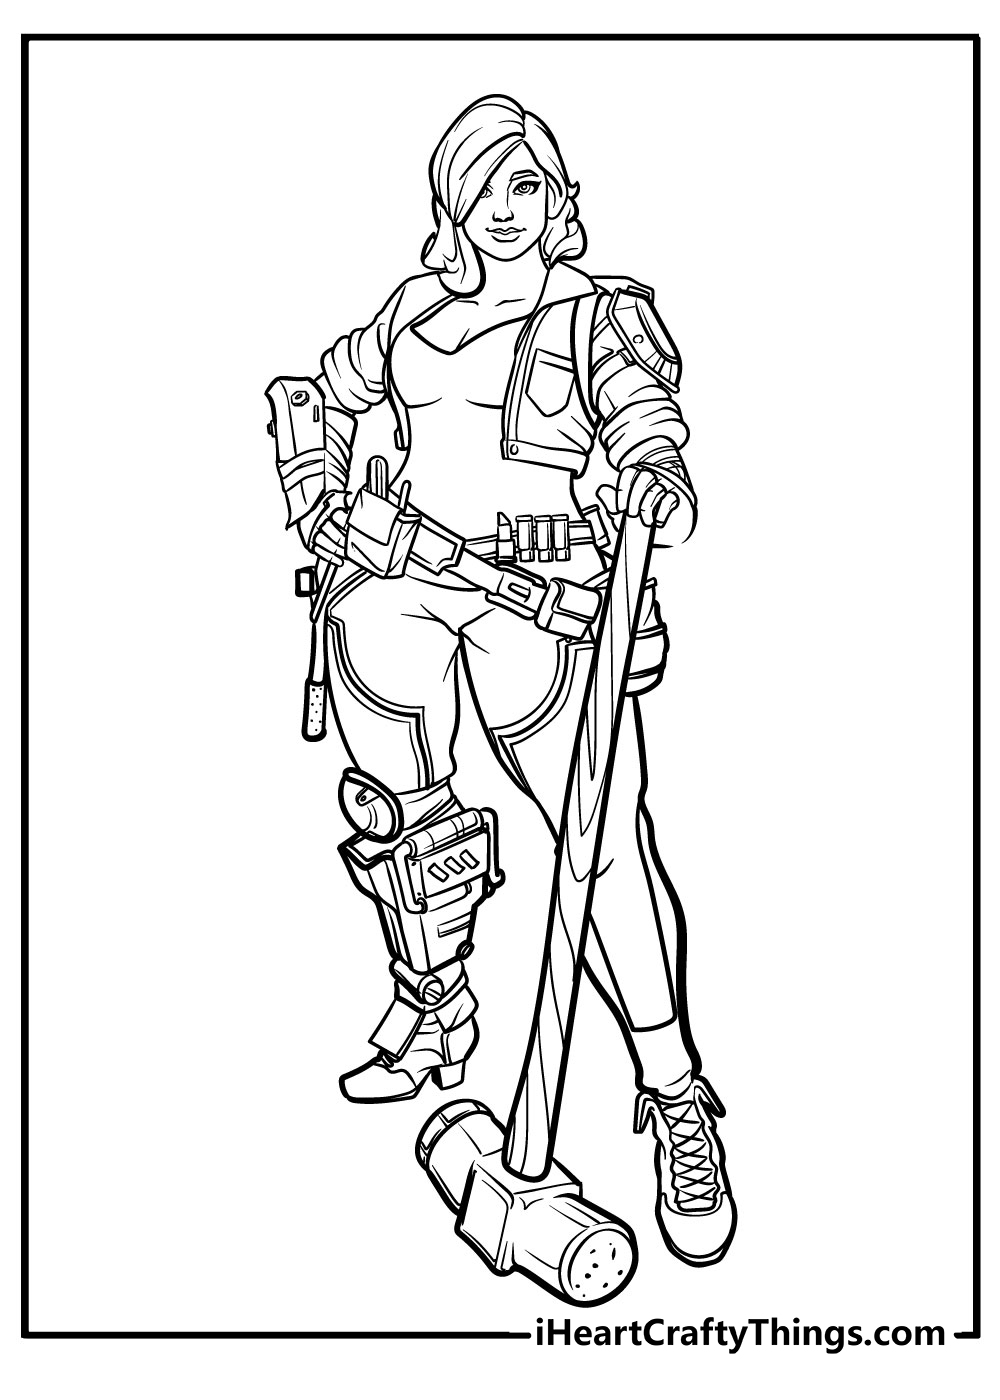 female Fortnite Coloring Pages free printable for children